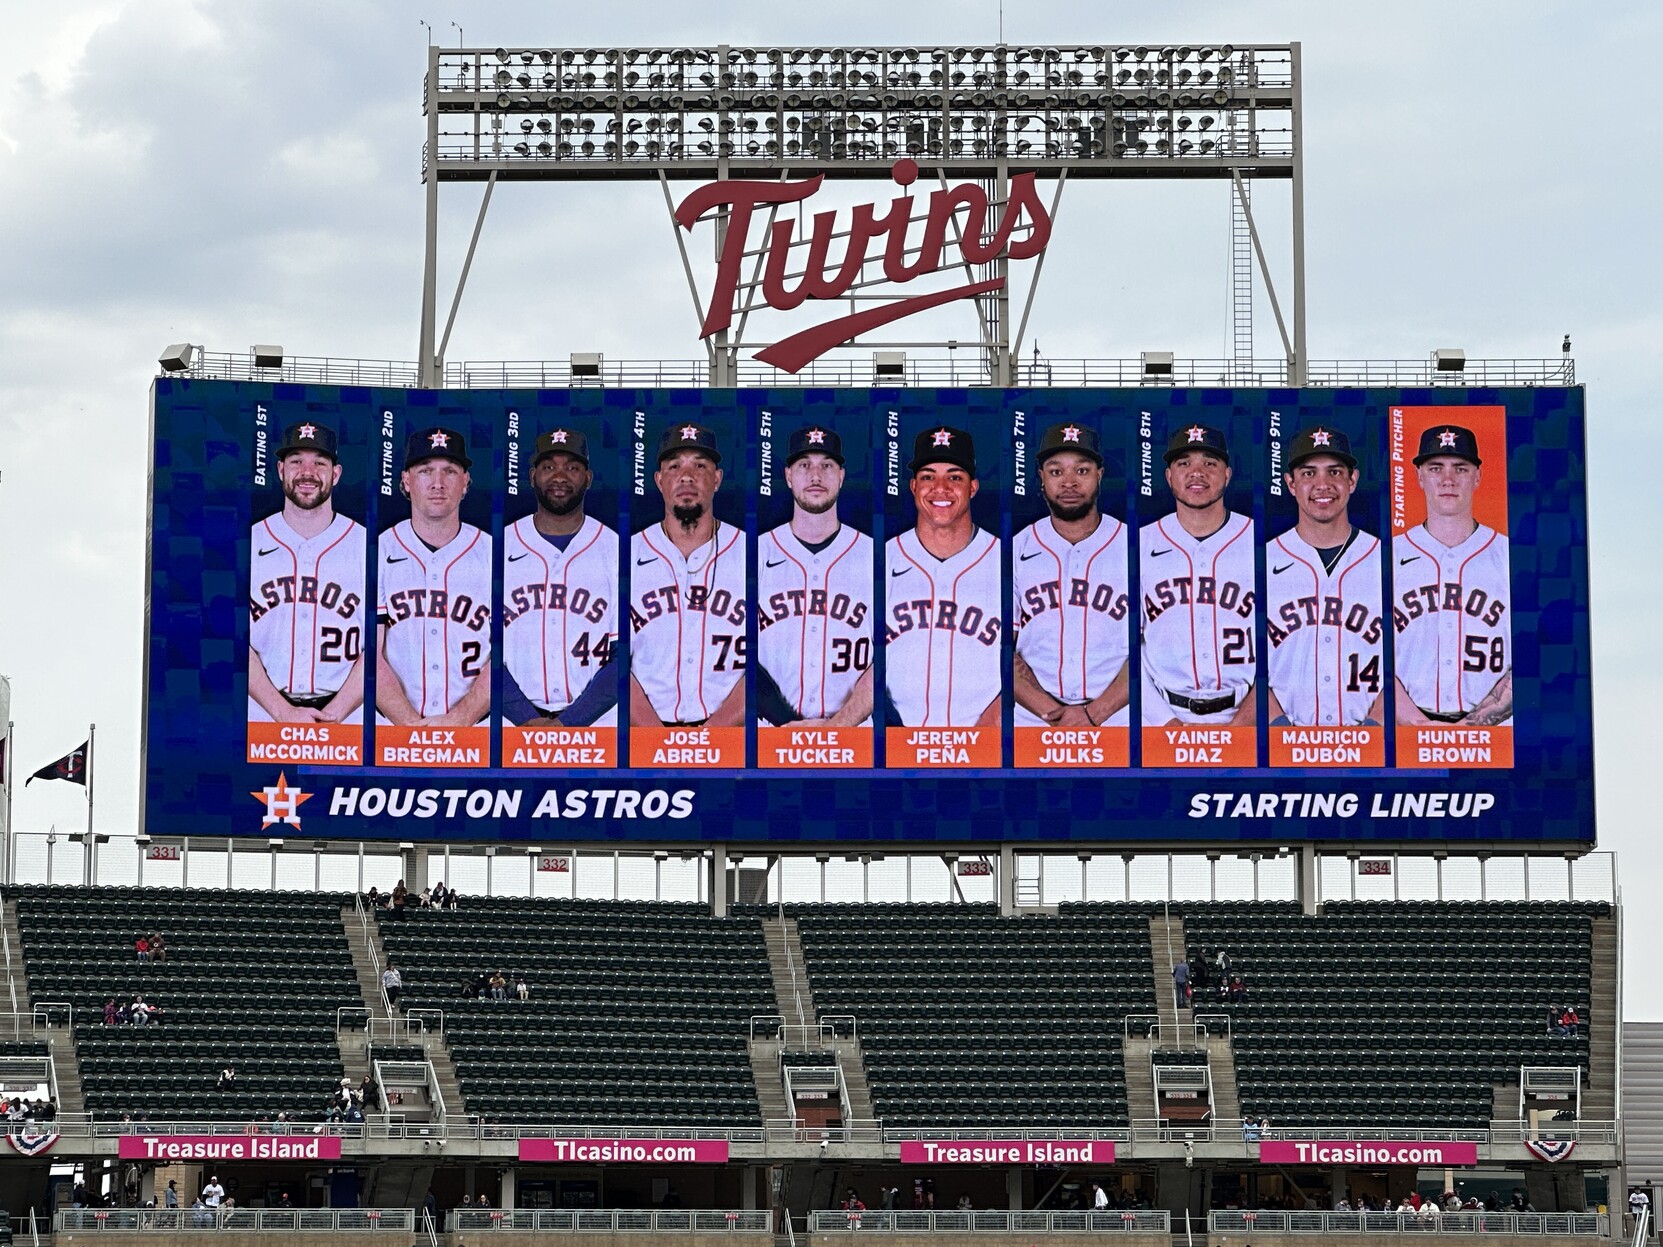 New ultra-wide scoreboard at Target Field in Minneapolis showing all nine starting player pictures for the visiting Houston Astros